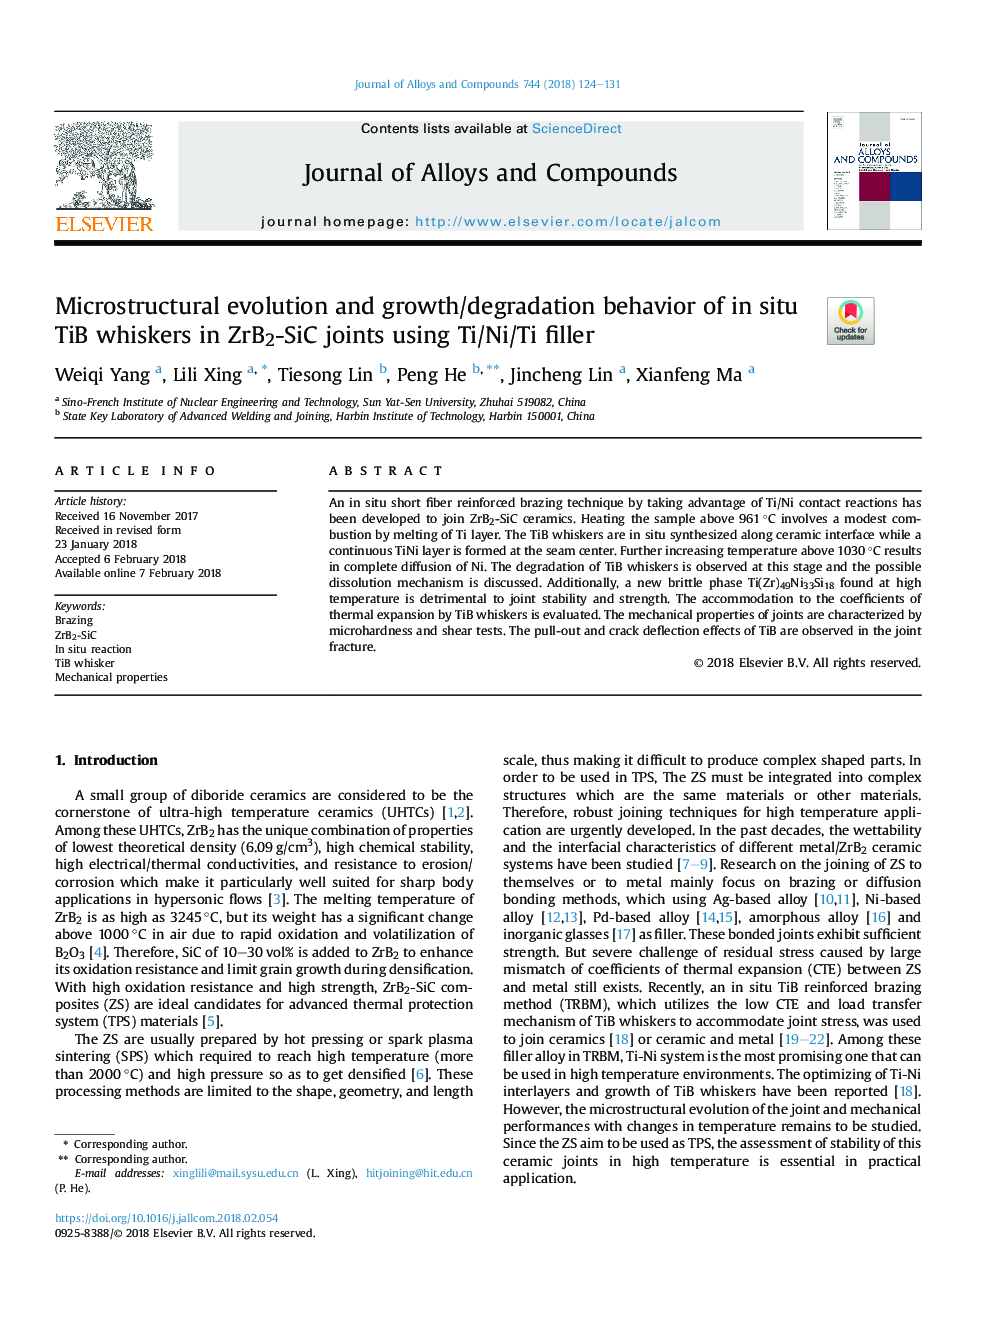 Microstructural evolution and growth/degradation behavior of in situ TiB whiskers in ZrB2-SiC joints using Ti/Ni/Ti filler